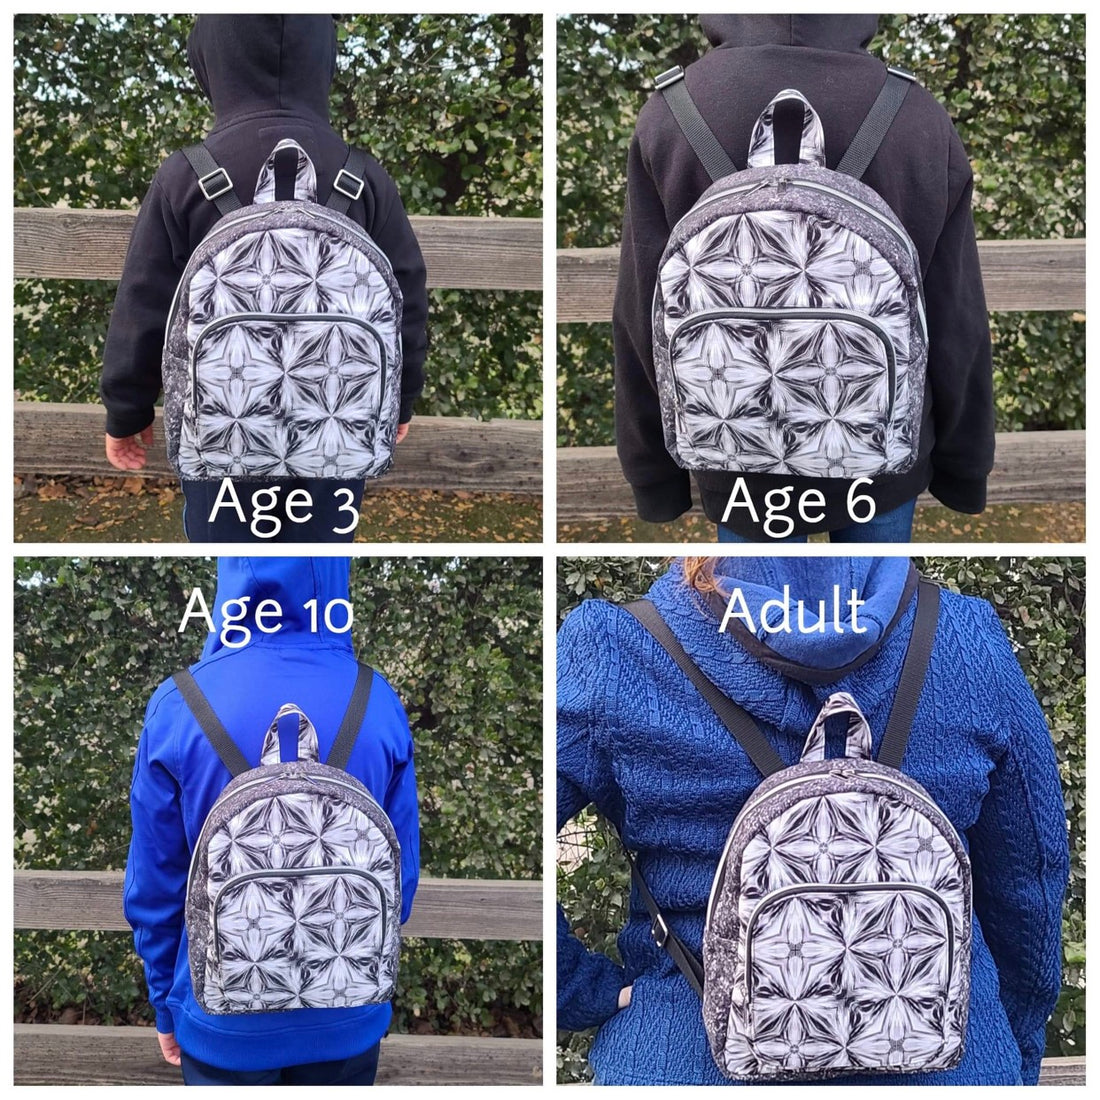 With instruction - 3 ways leather backpack pattern PDF instant download  ACC-40